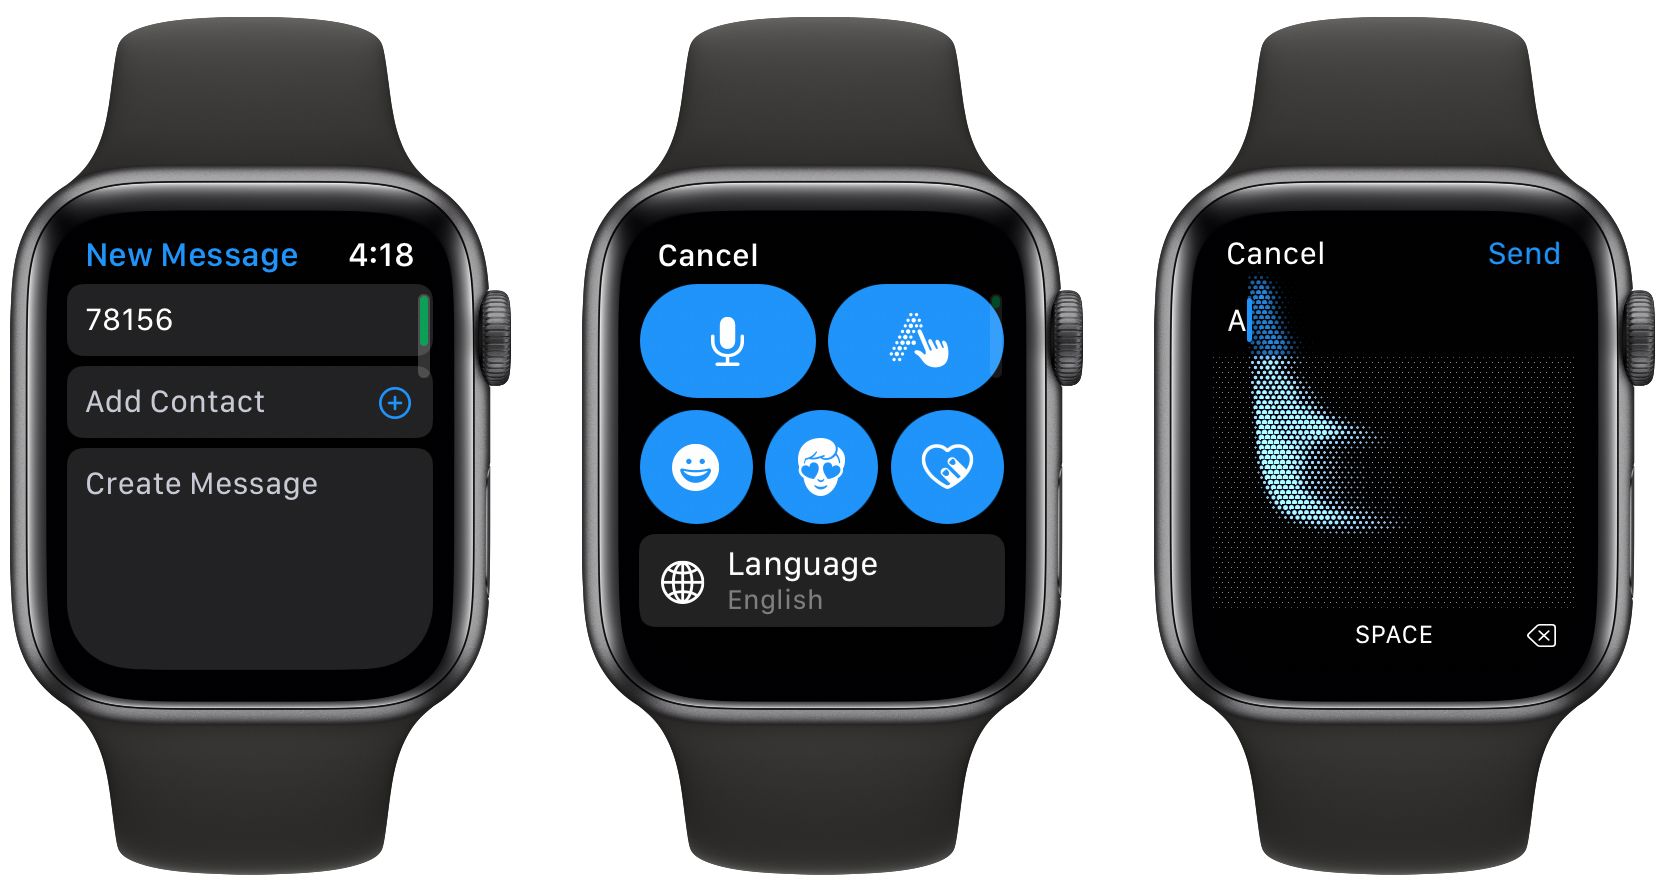 apple watch scribble messages - Come scrivere brevi messaggi sul tuo Apple Watch con Scribble